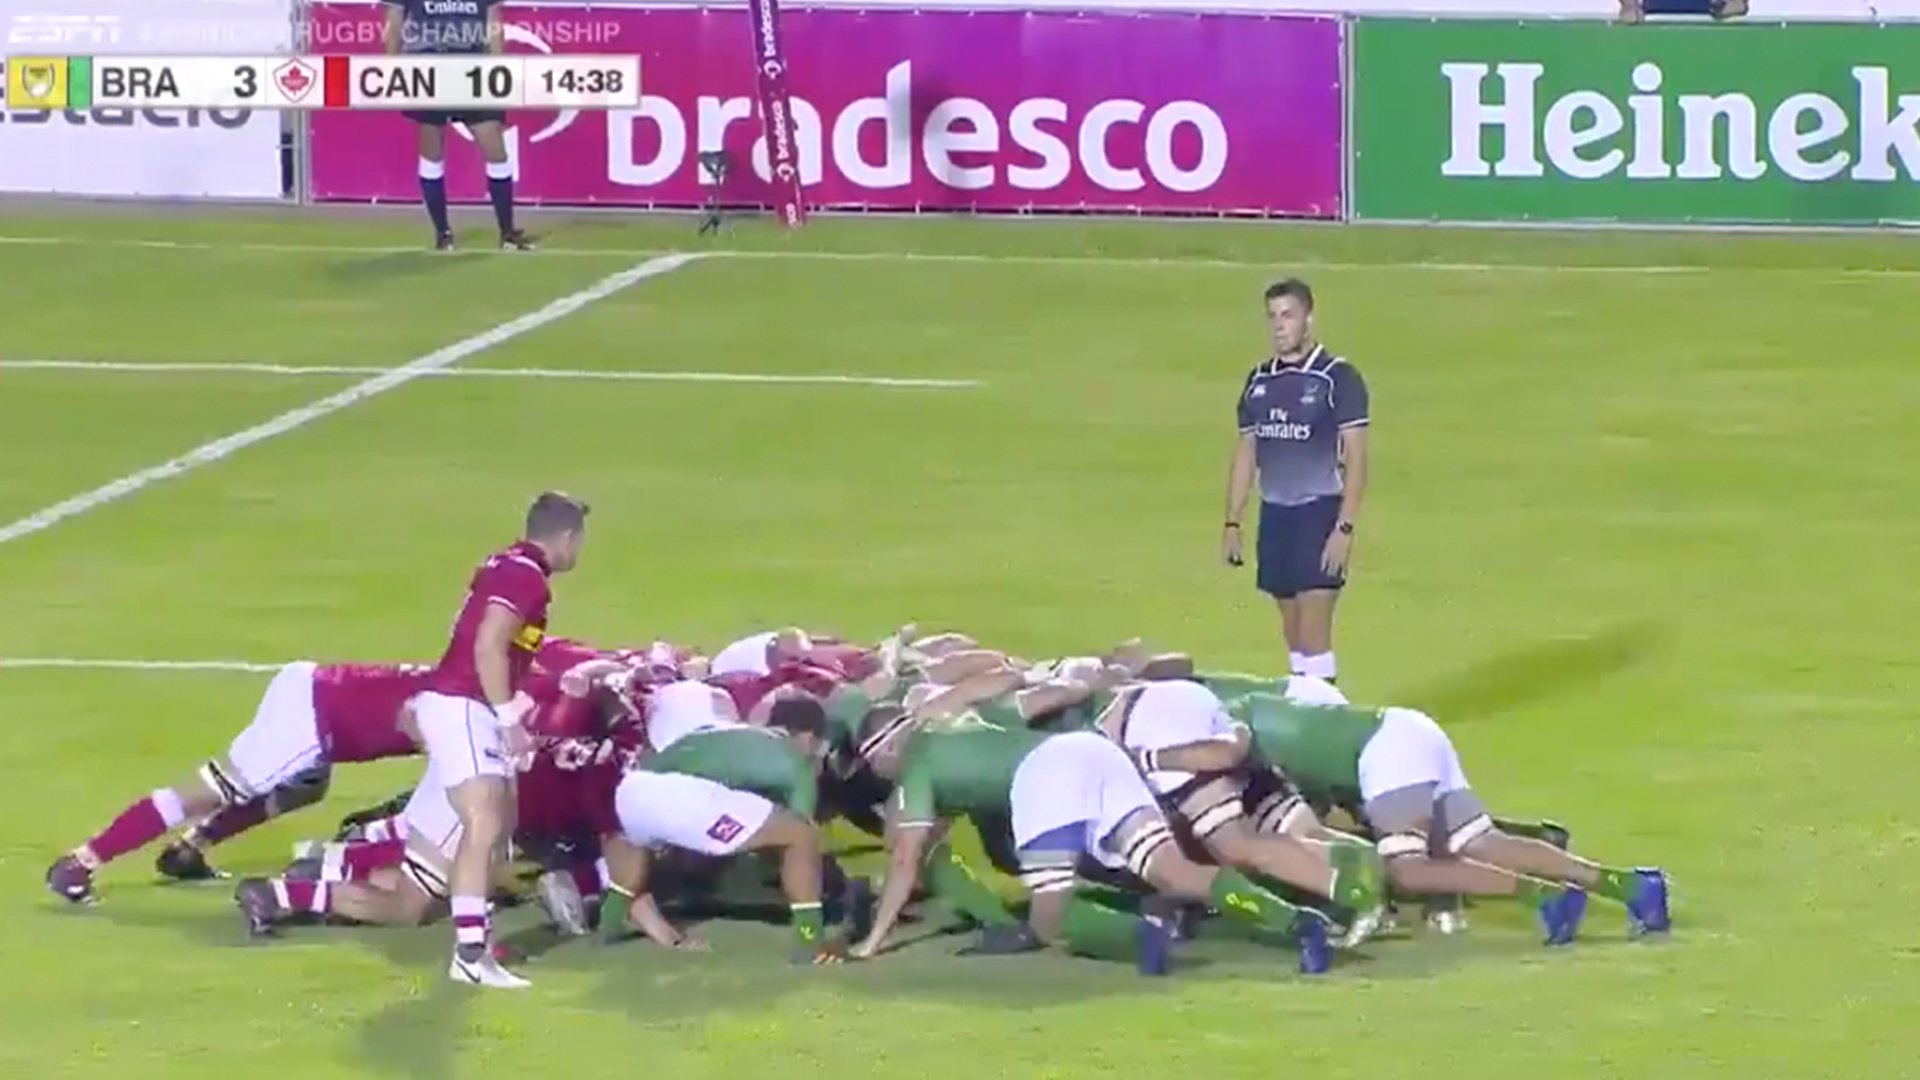 The Brazilian scrum is destroying every single opponent in it's path